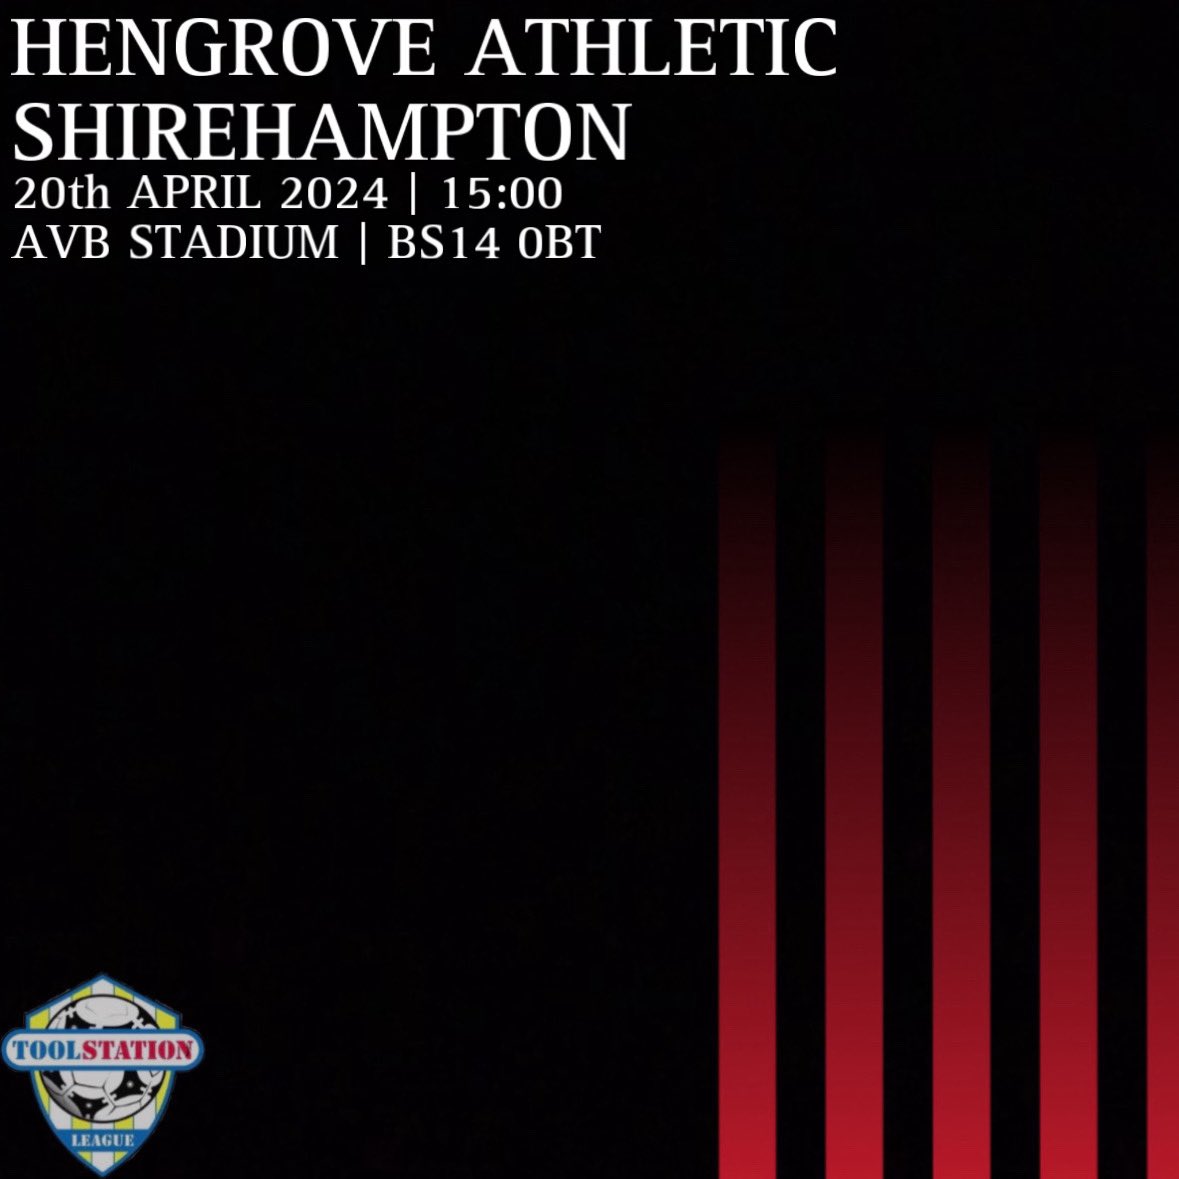 NEXT UP 3 games left for @LiamG1983 and his First Team, beginning with a trip to @HengroveAFC this Saturday. @TSWesternLeague @bsoccerworld @swsportsnews 🔴☠️